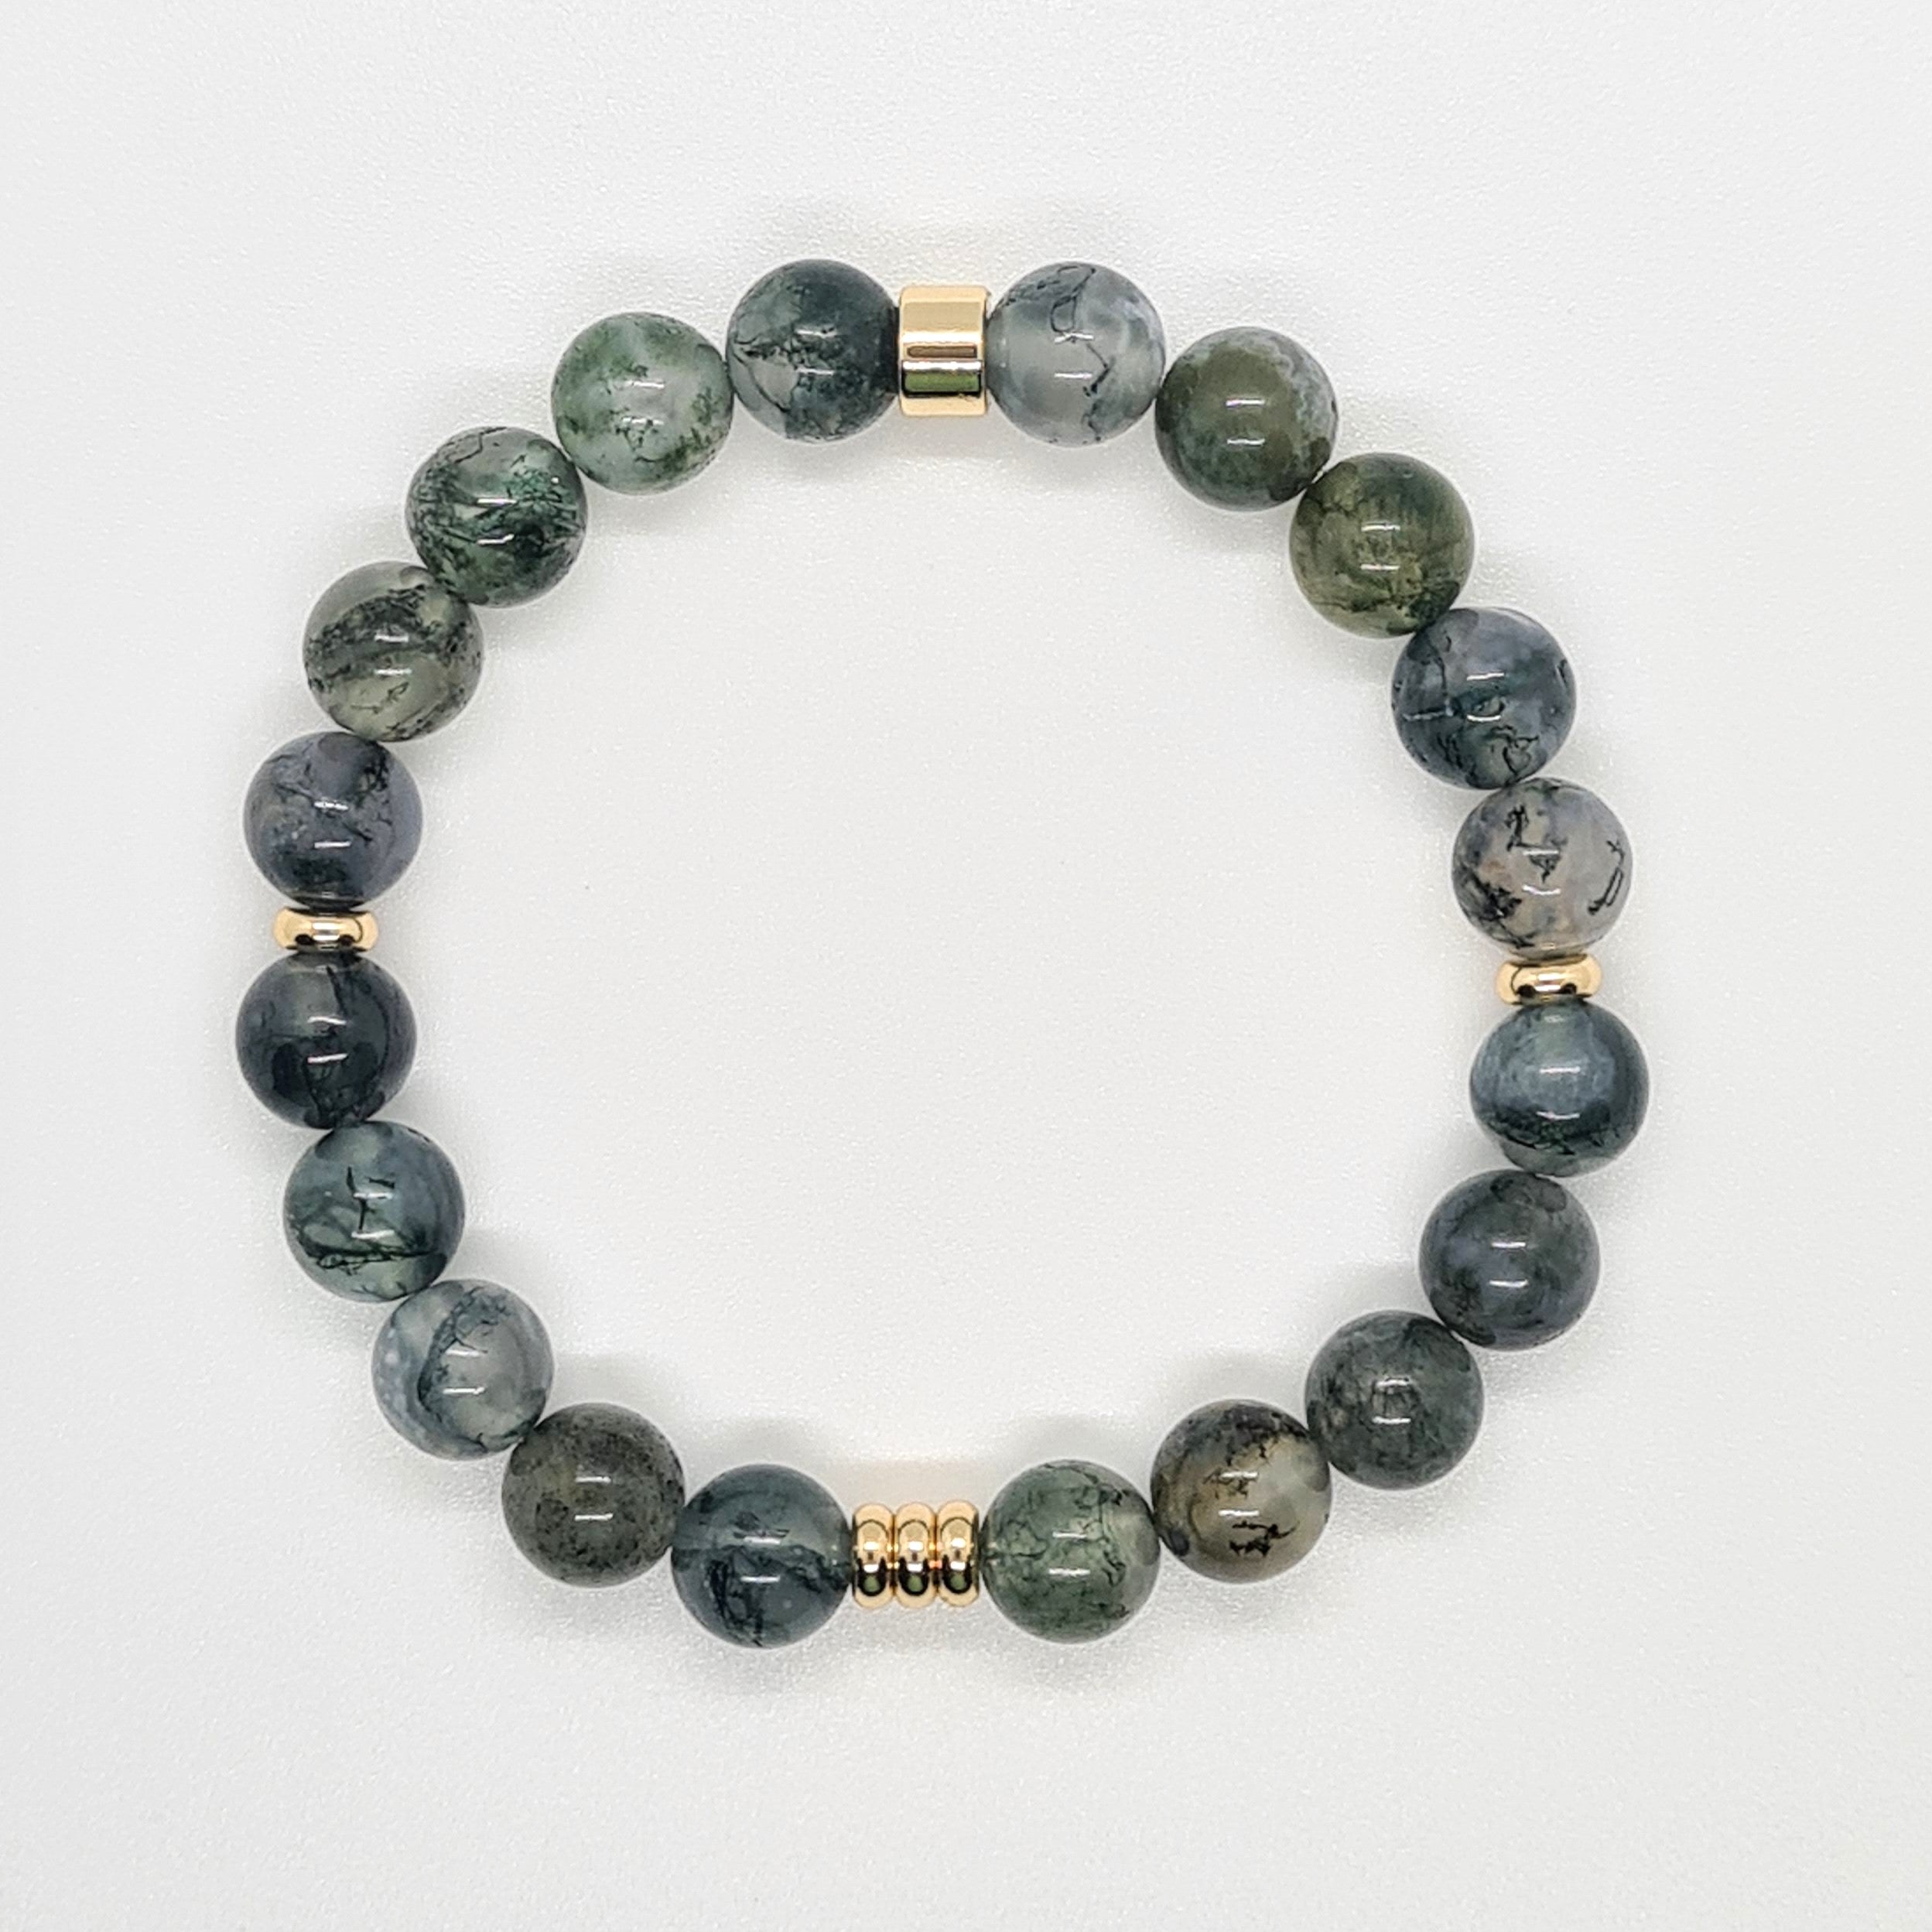 Moss agate with gold plated accessories from above